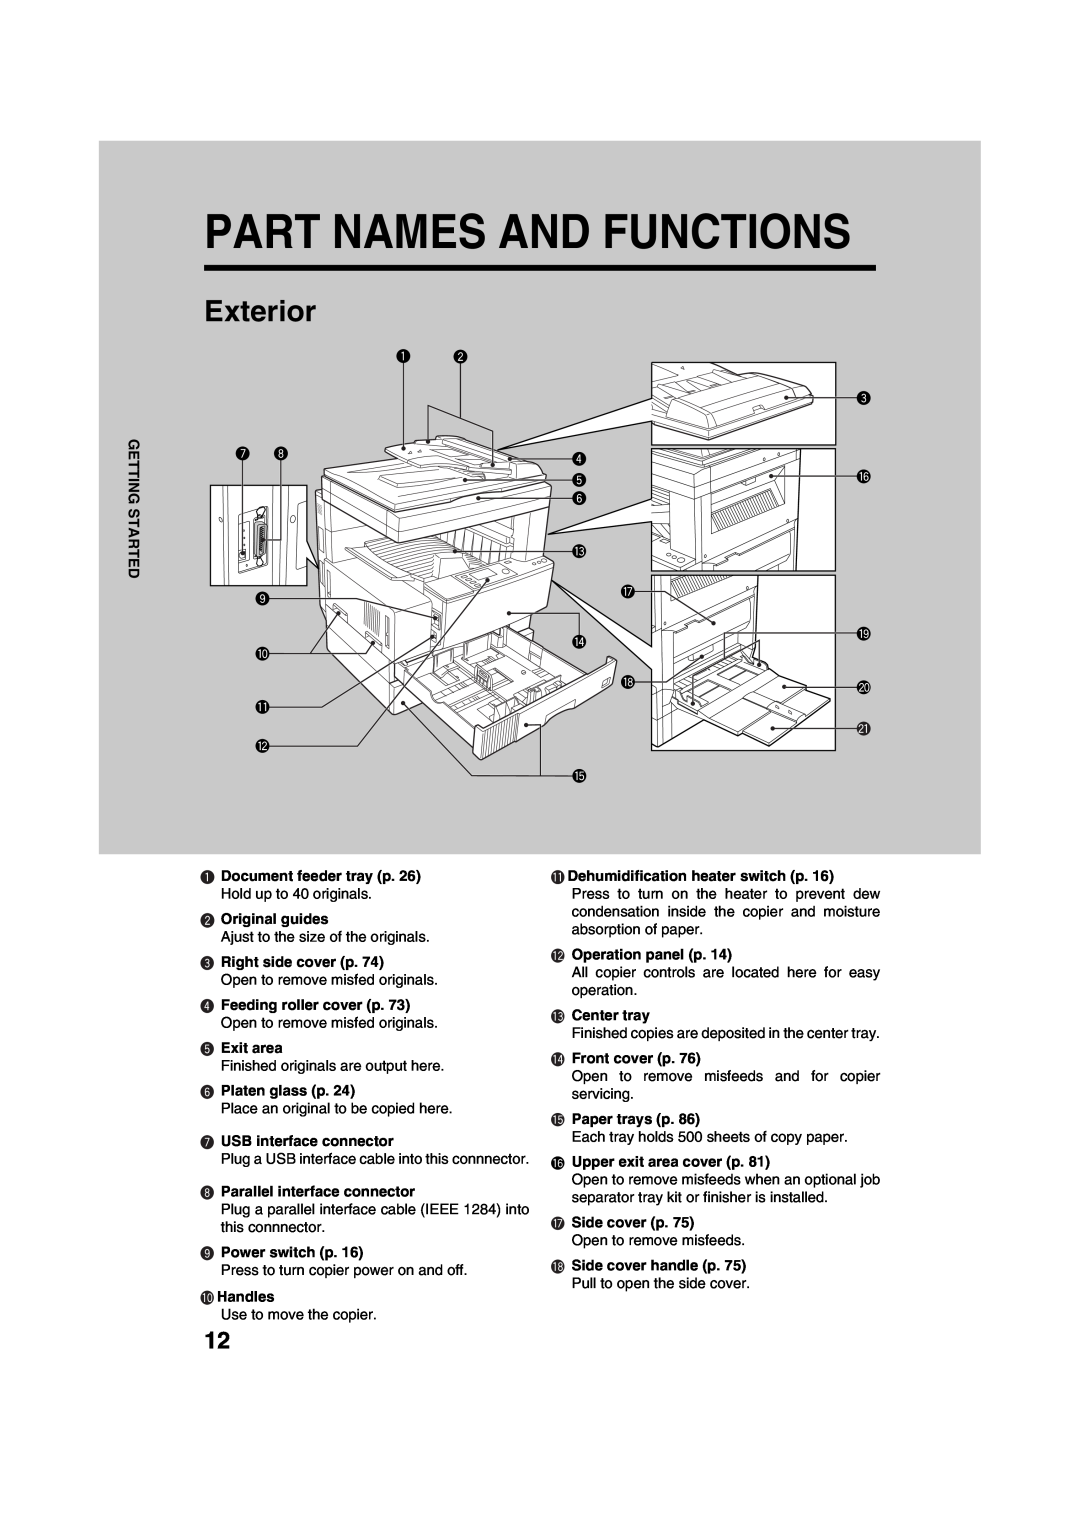 Sharp AR-M208 operation manual Part Names And Functions, Exterior 